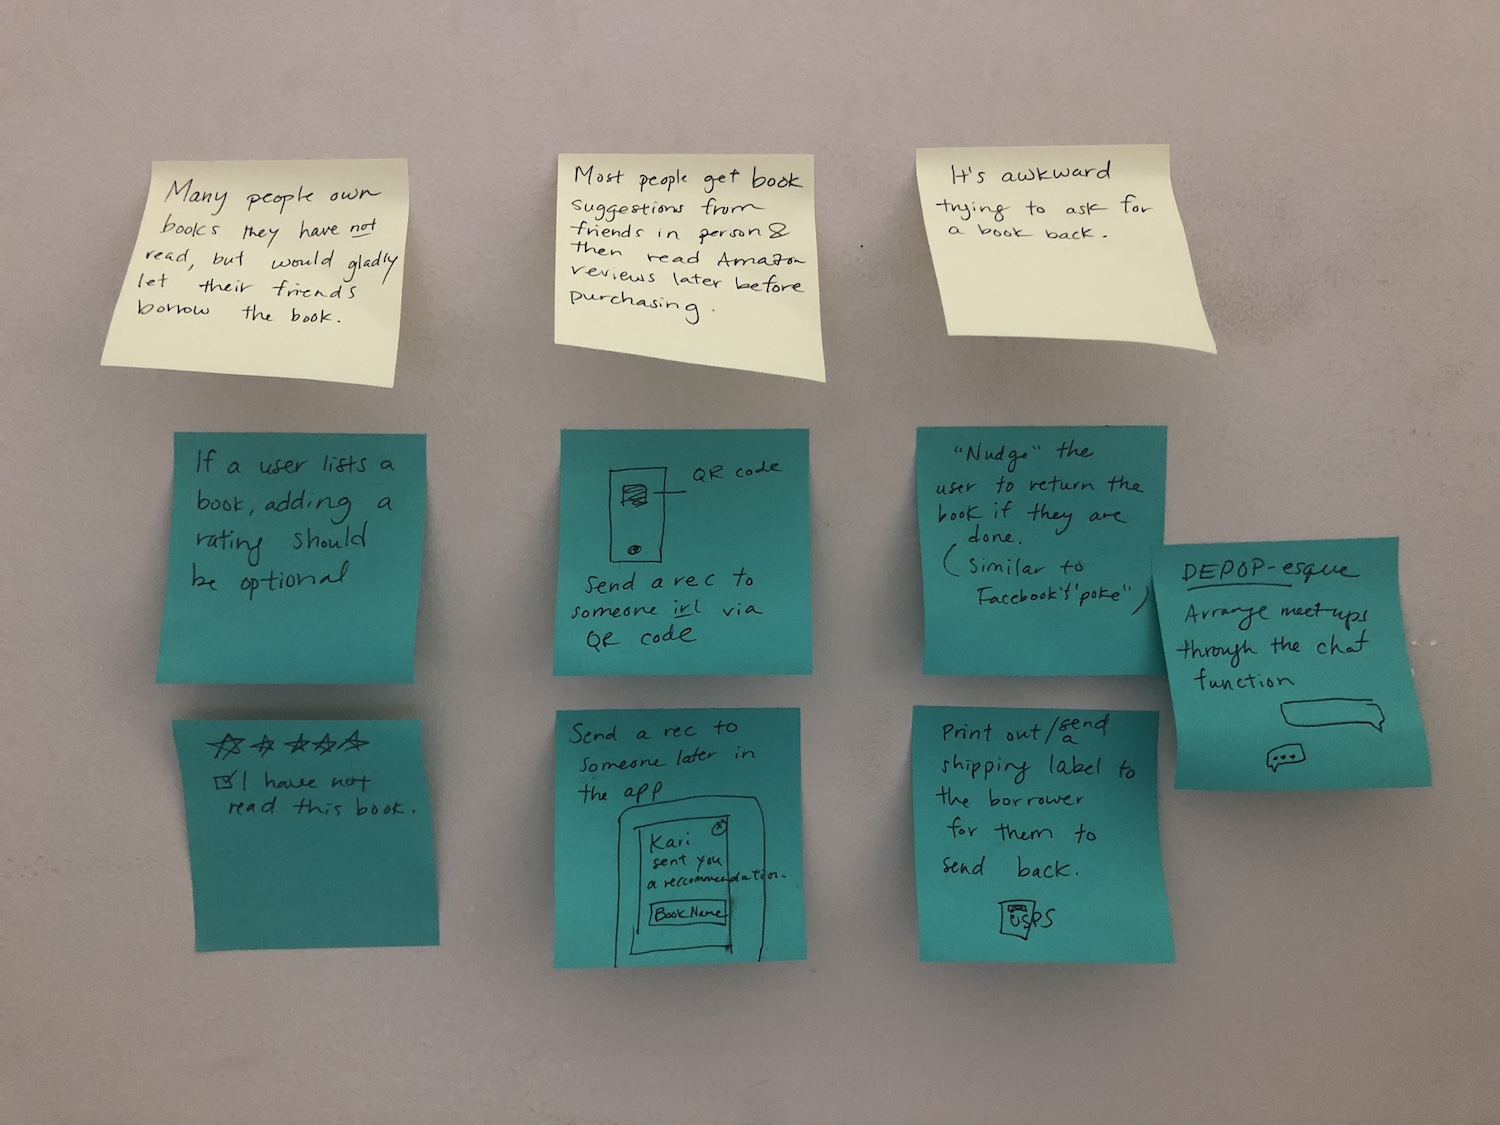 Sticky notes populate a wall. There are three main sticky notes denoting pain points and several sticky notes beneath them denoting ideas and solutions.